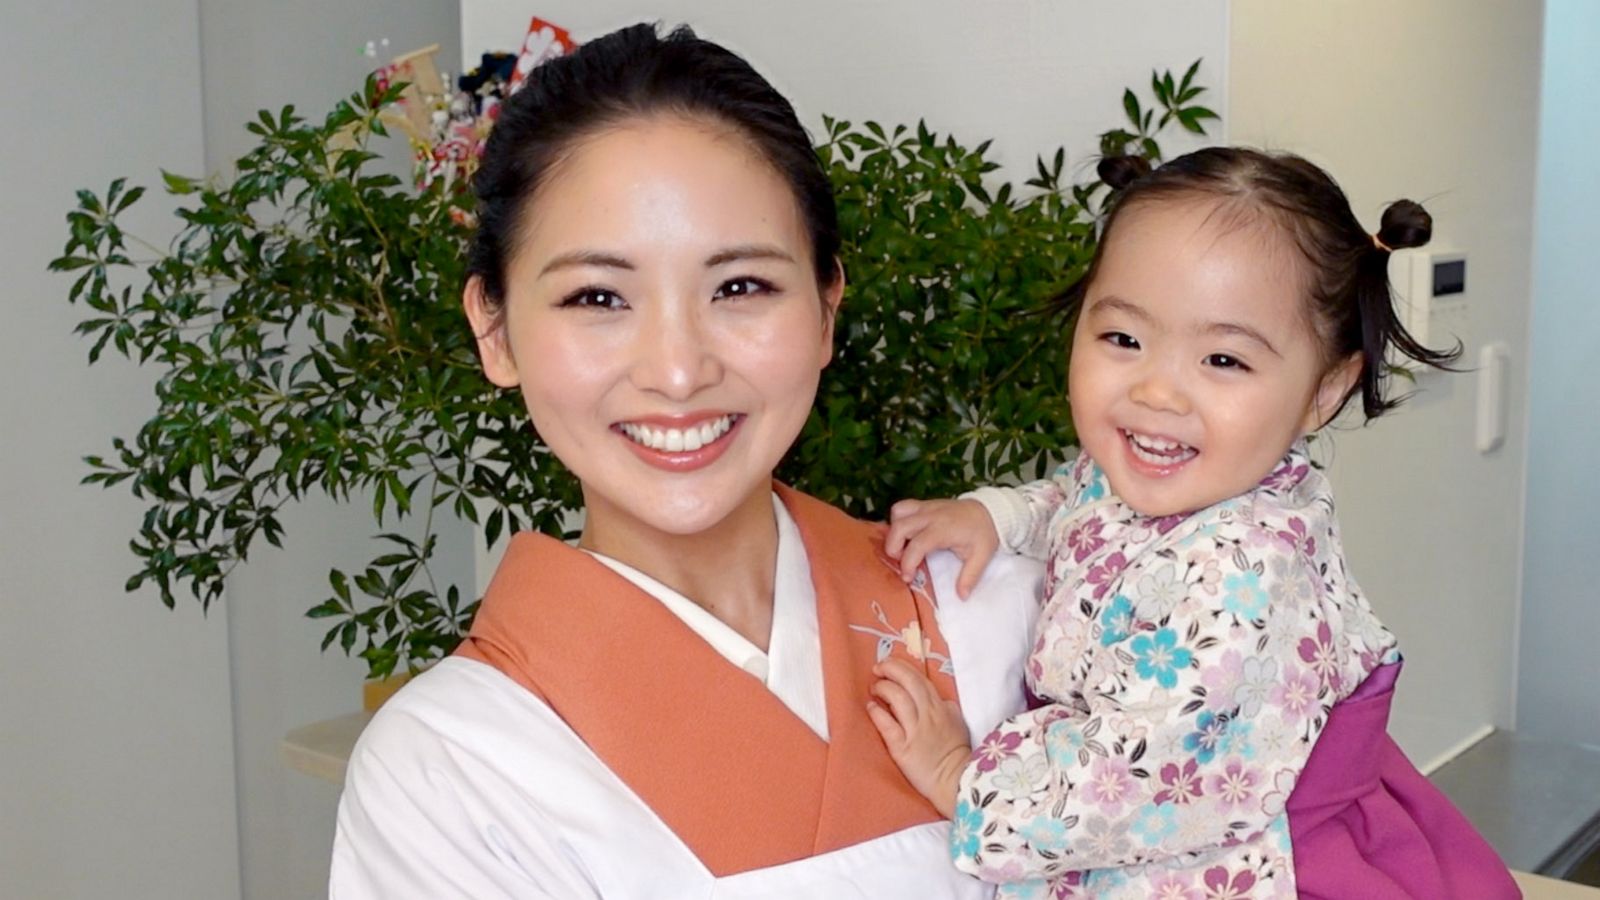 Meet the mom, a former geisha, who just hit 1 million subscribers on YouTube